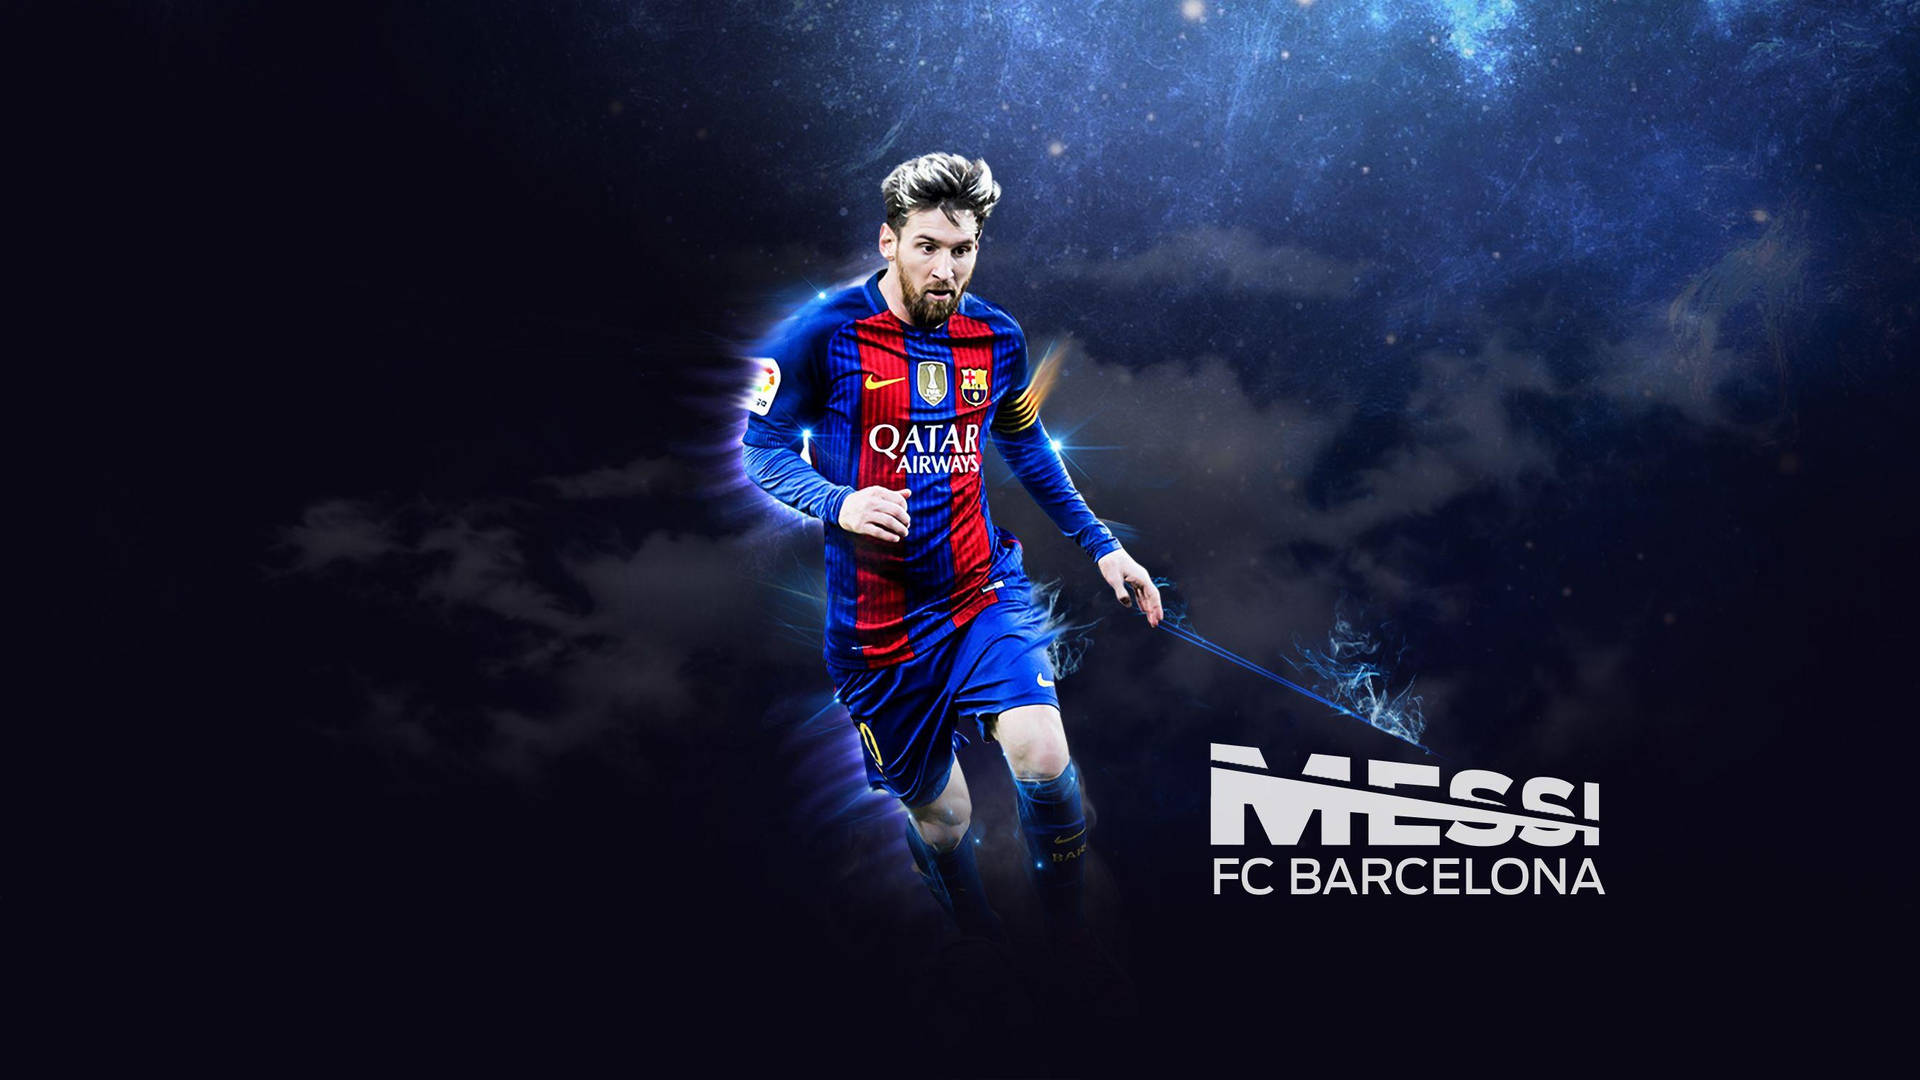 Messi Barcelona In Blue Cloudy Backdrop Wallpaper